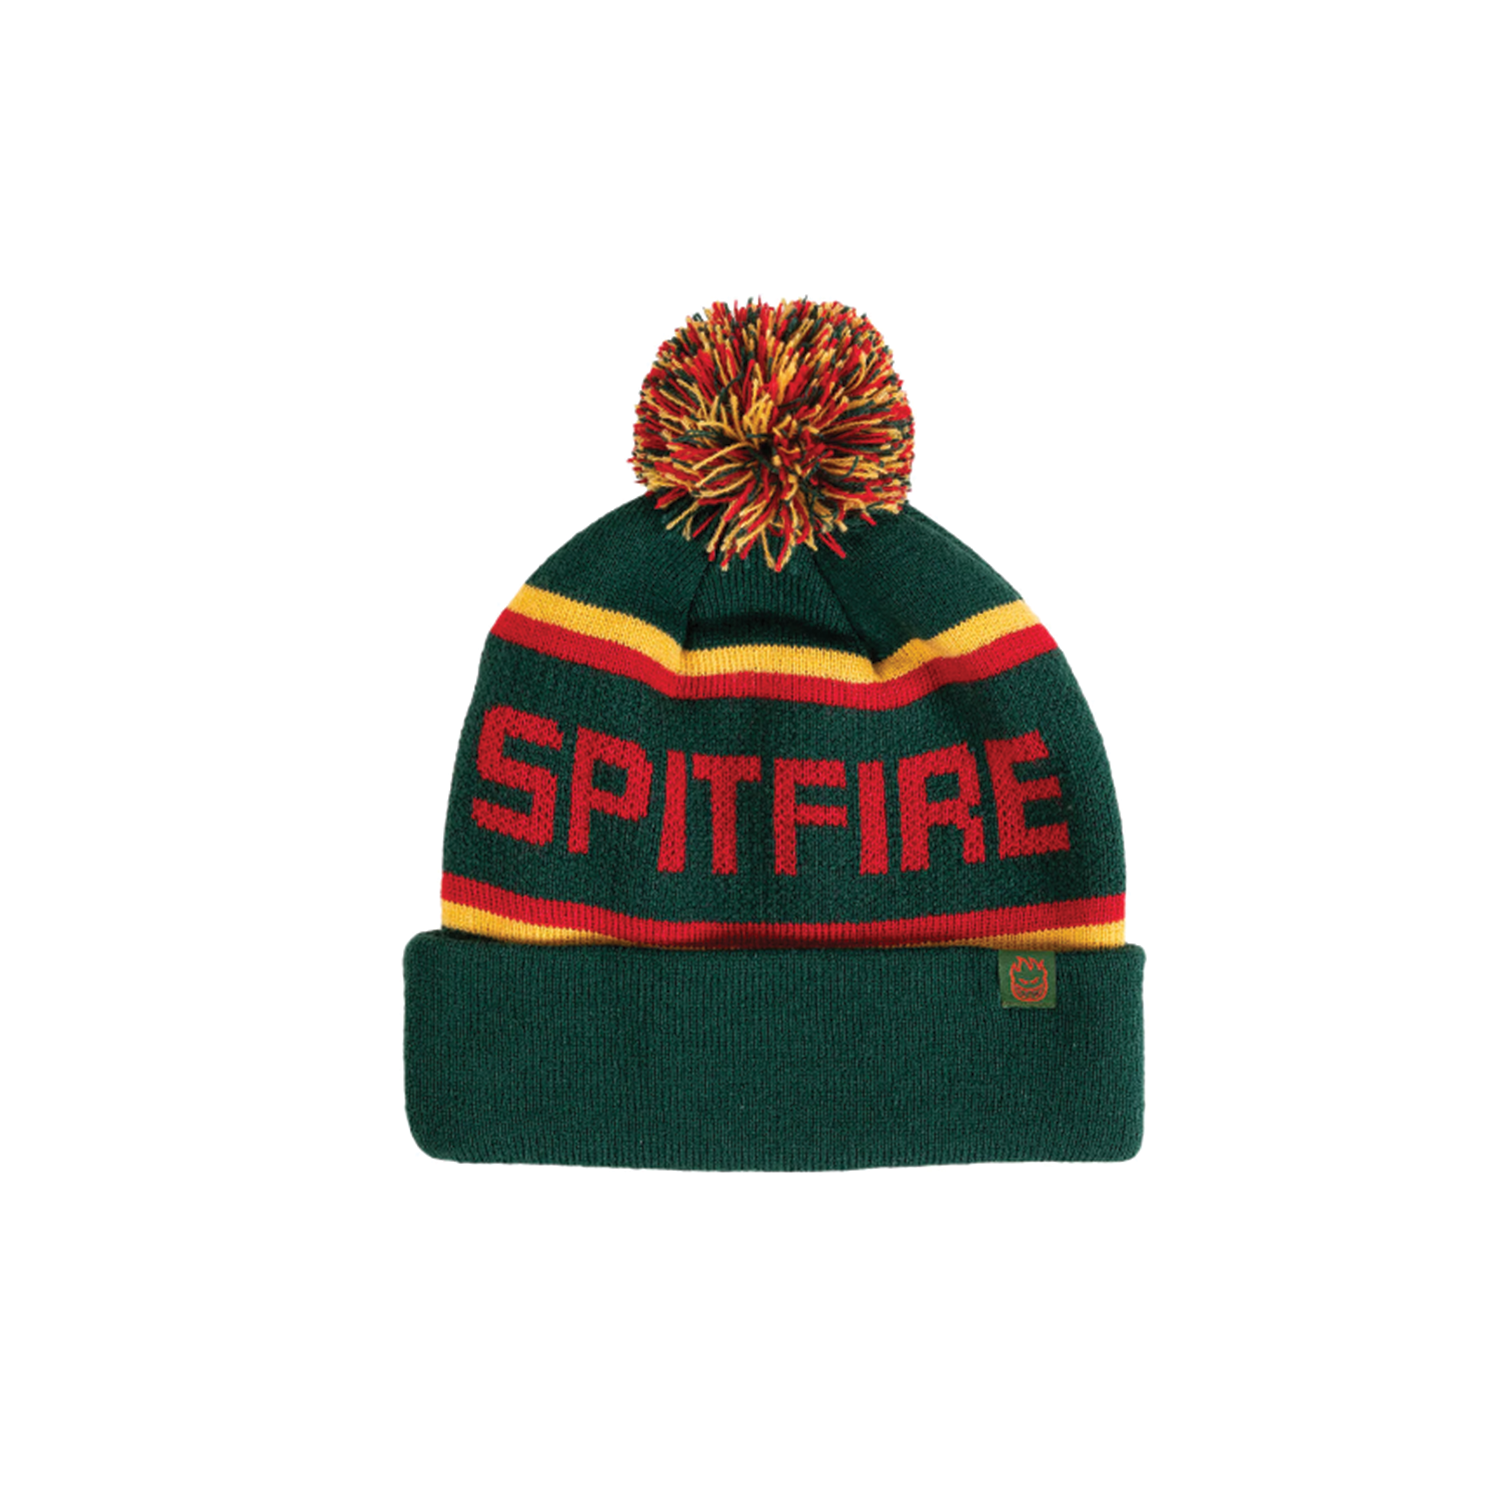 SPITFIRE BEANIE POM CLASSIC 87 FILL (GREEN/GOLD/RED)